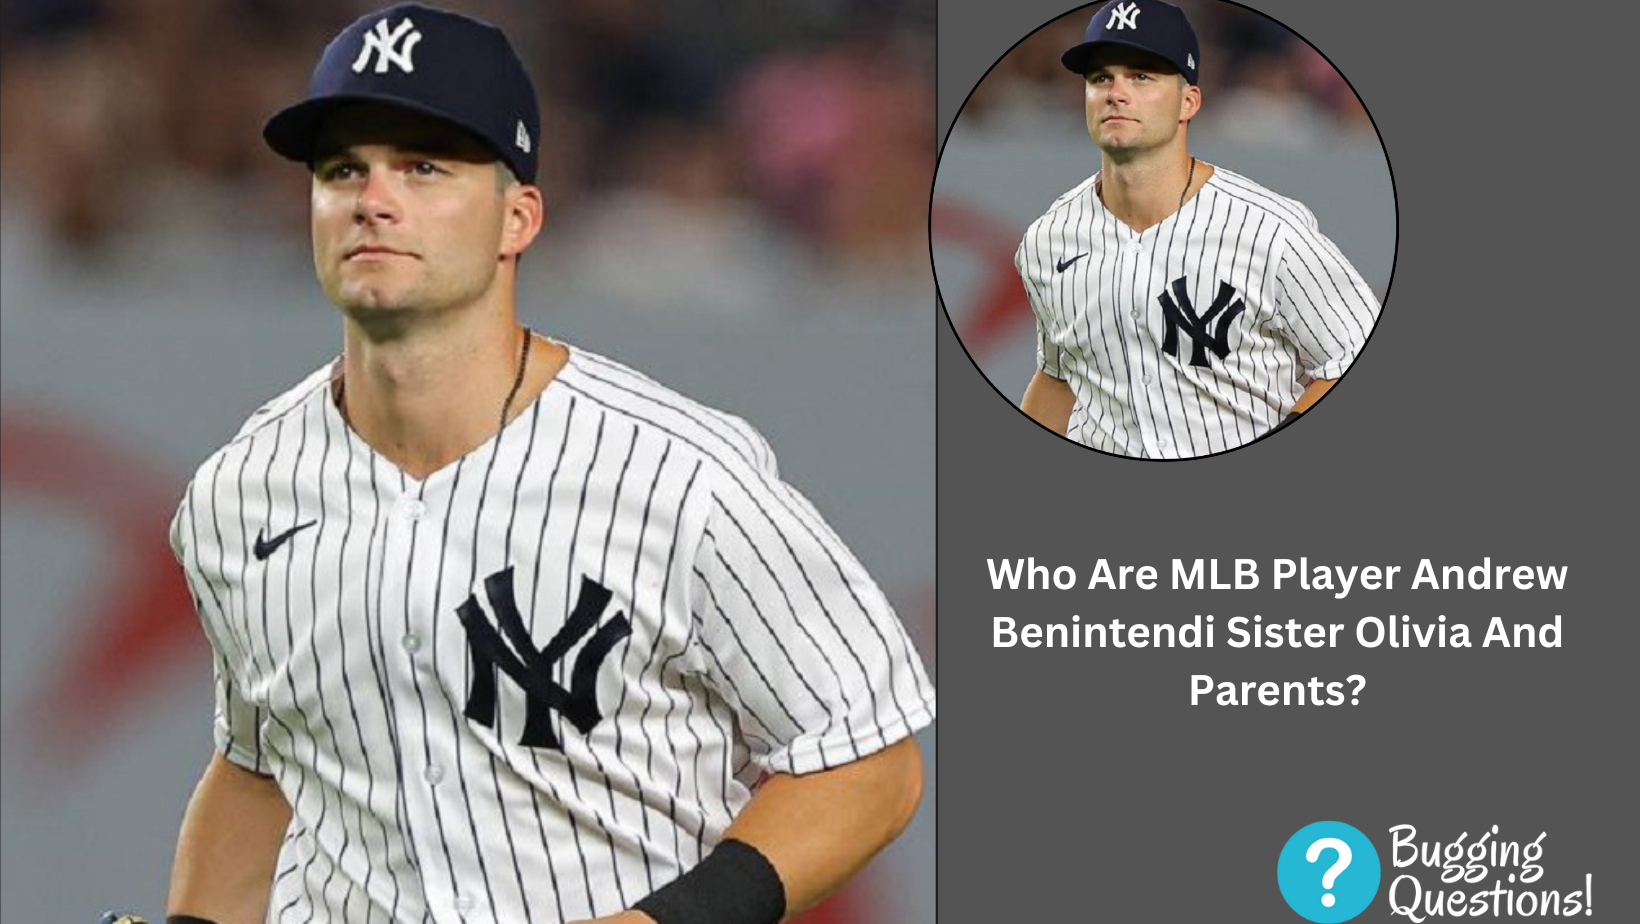 Who Are MLB Player Andrew Benintendi Sister Olivia And Parents?